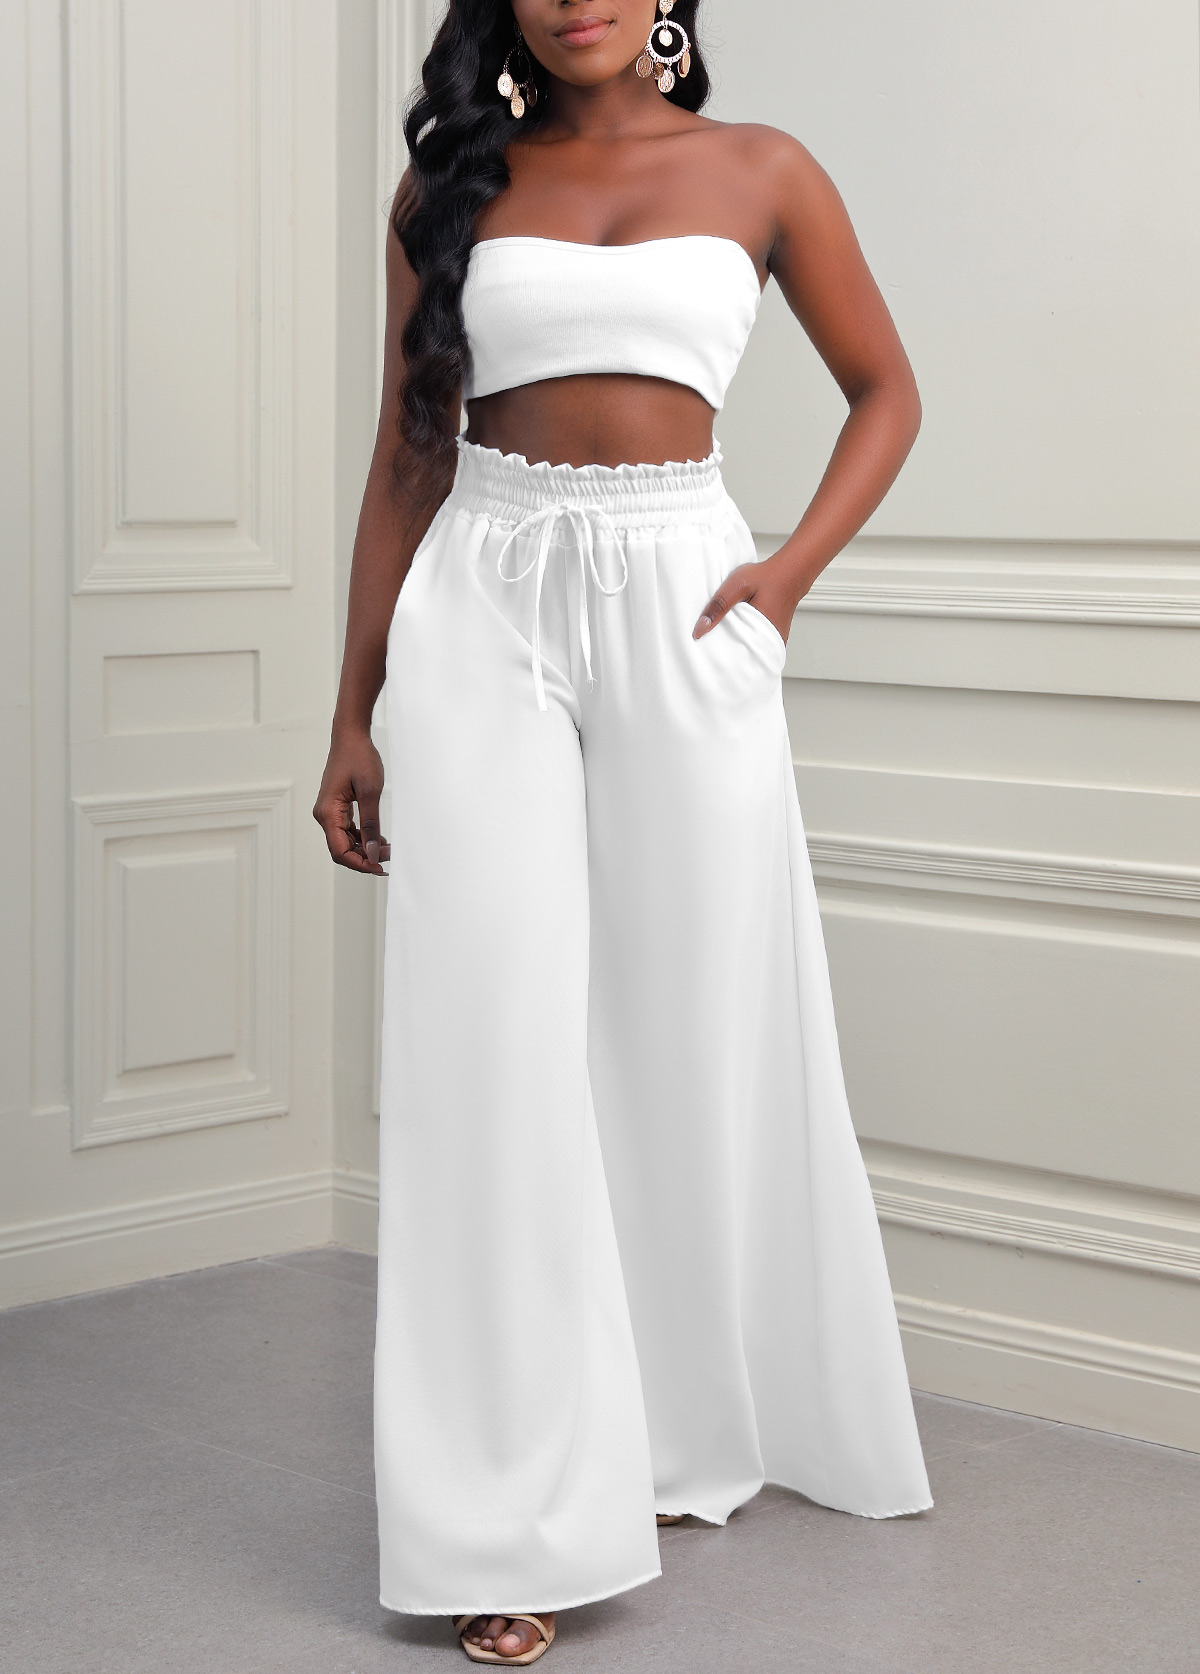 High Waisted White Tie Front Pants